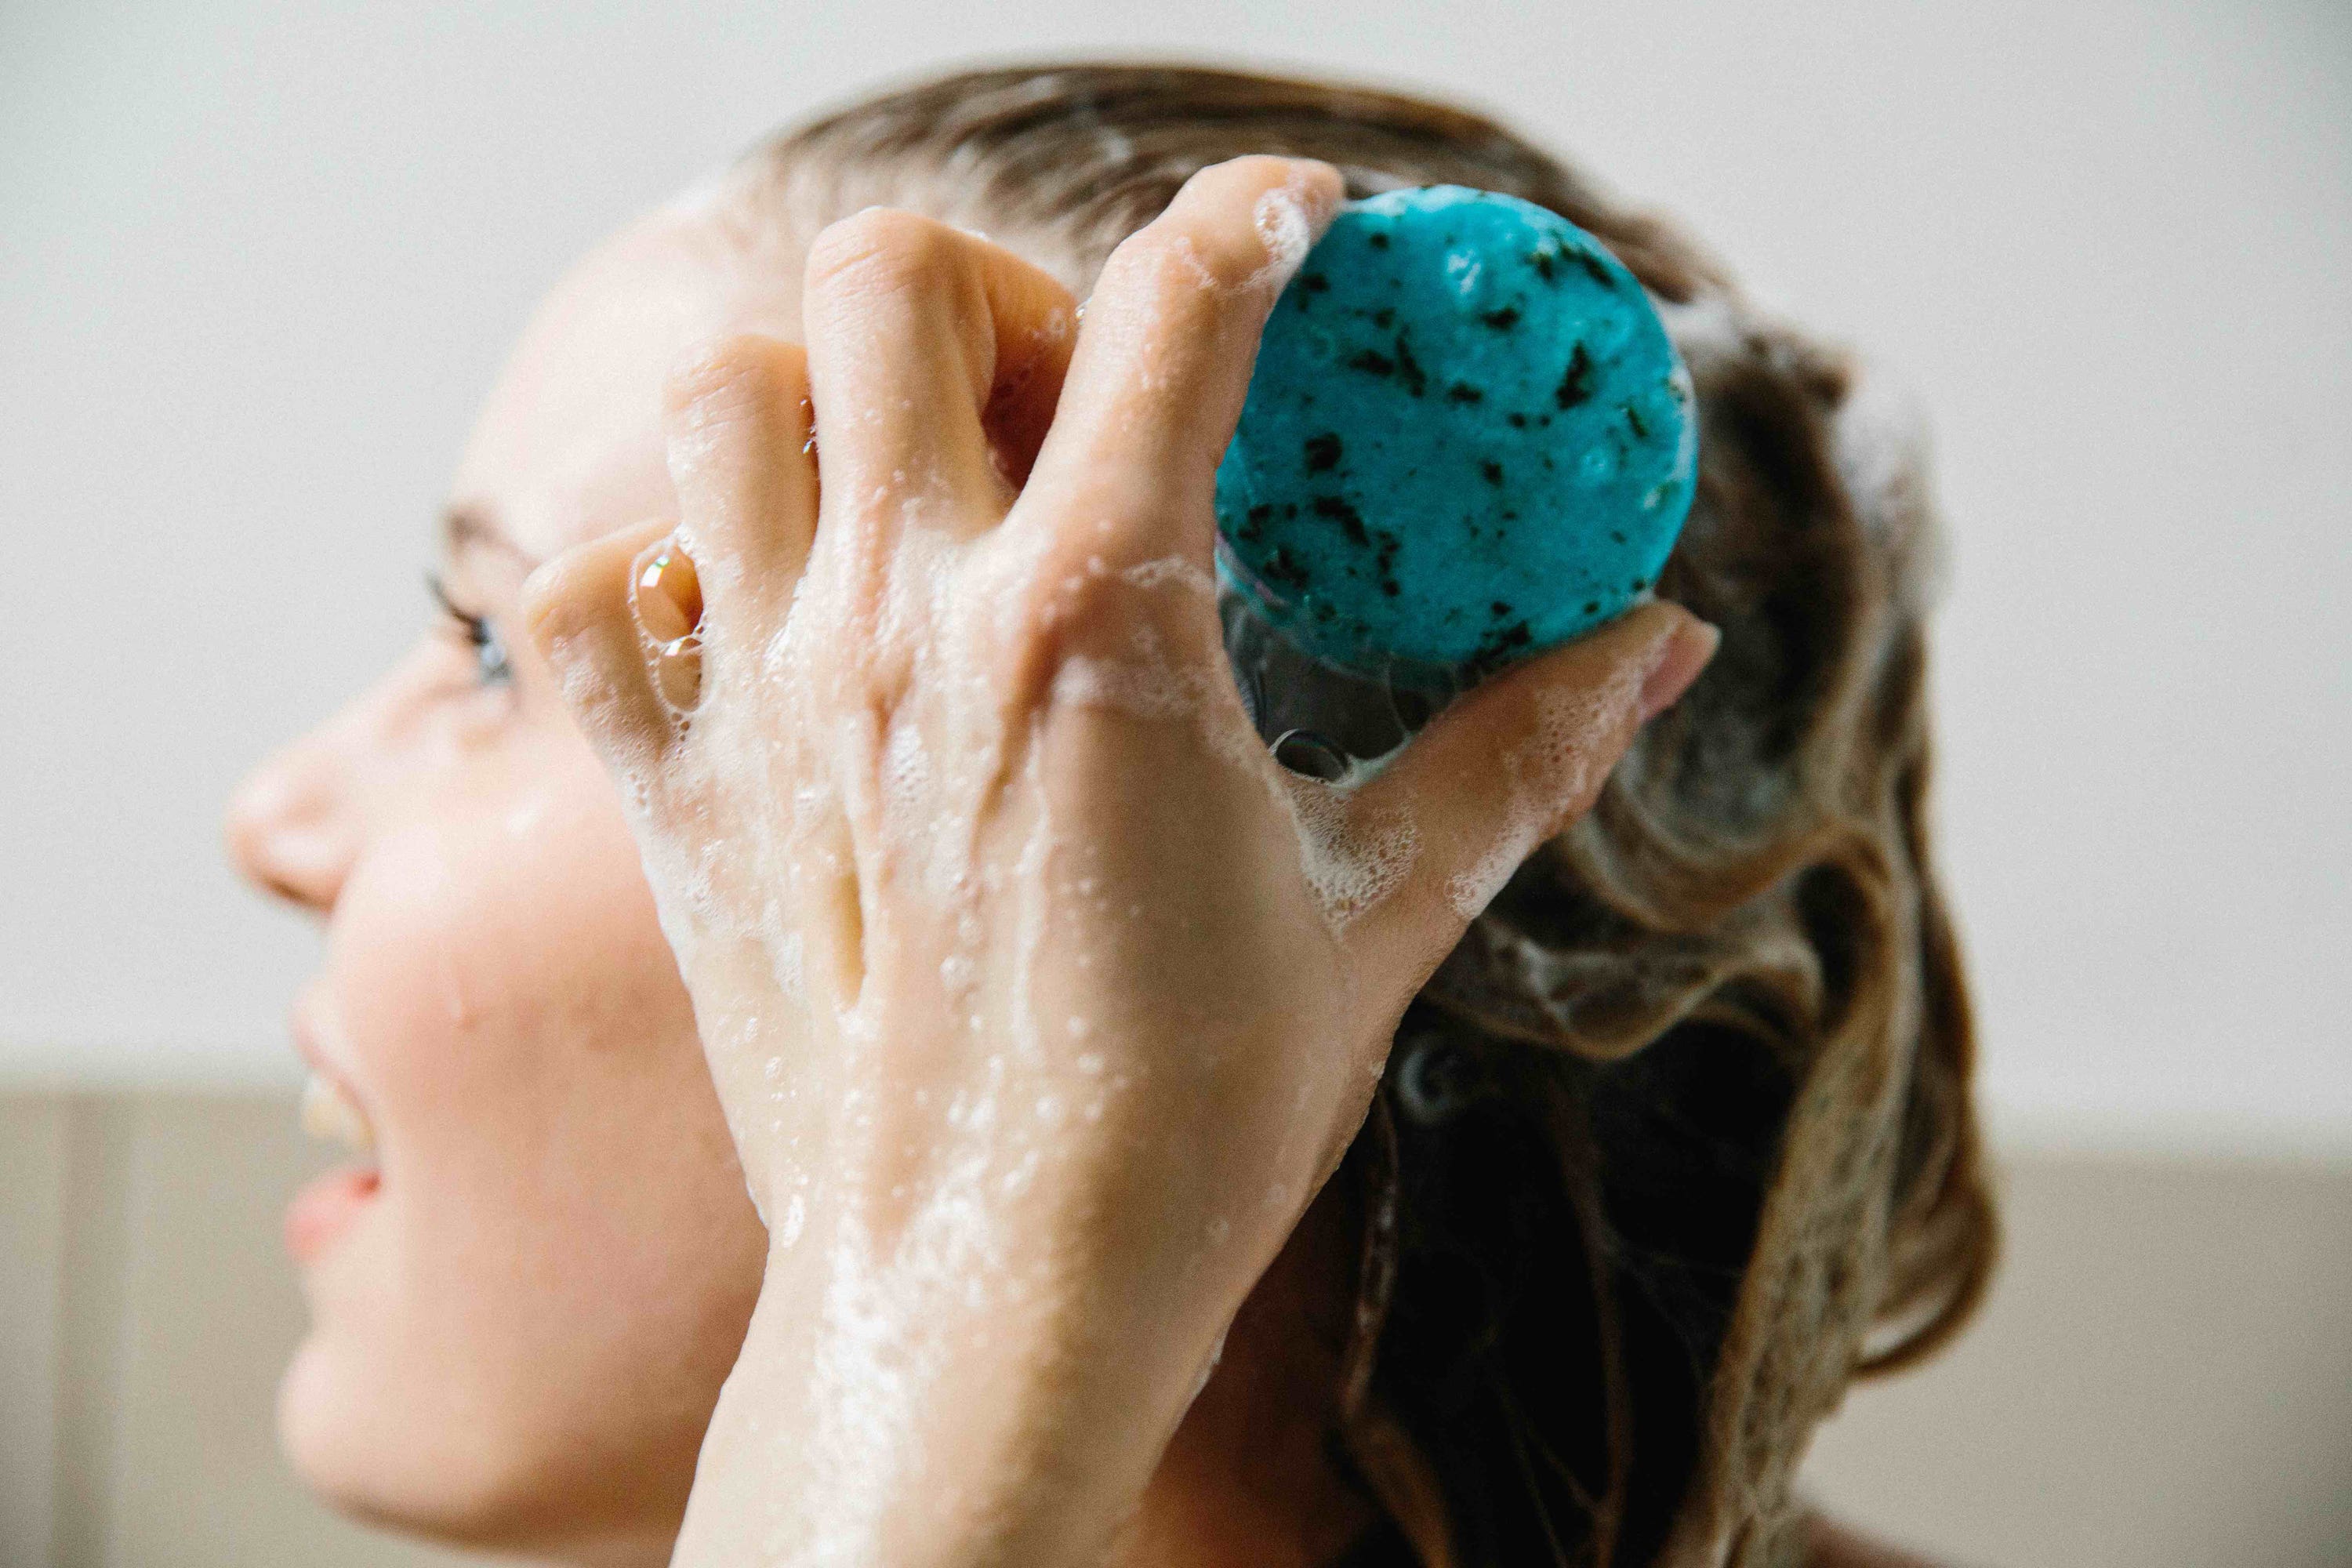 Shampoo bars have hit the mainstream in recent years (Lush/PA)